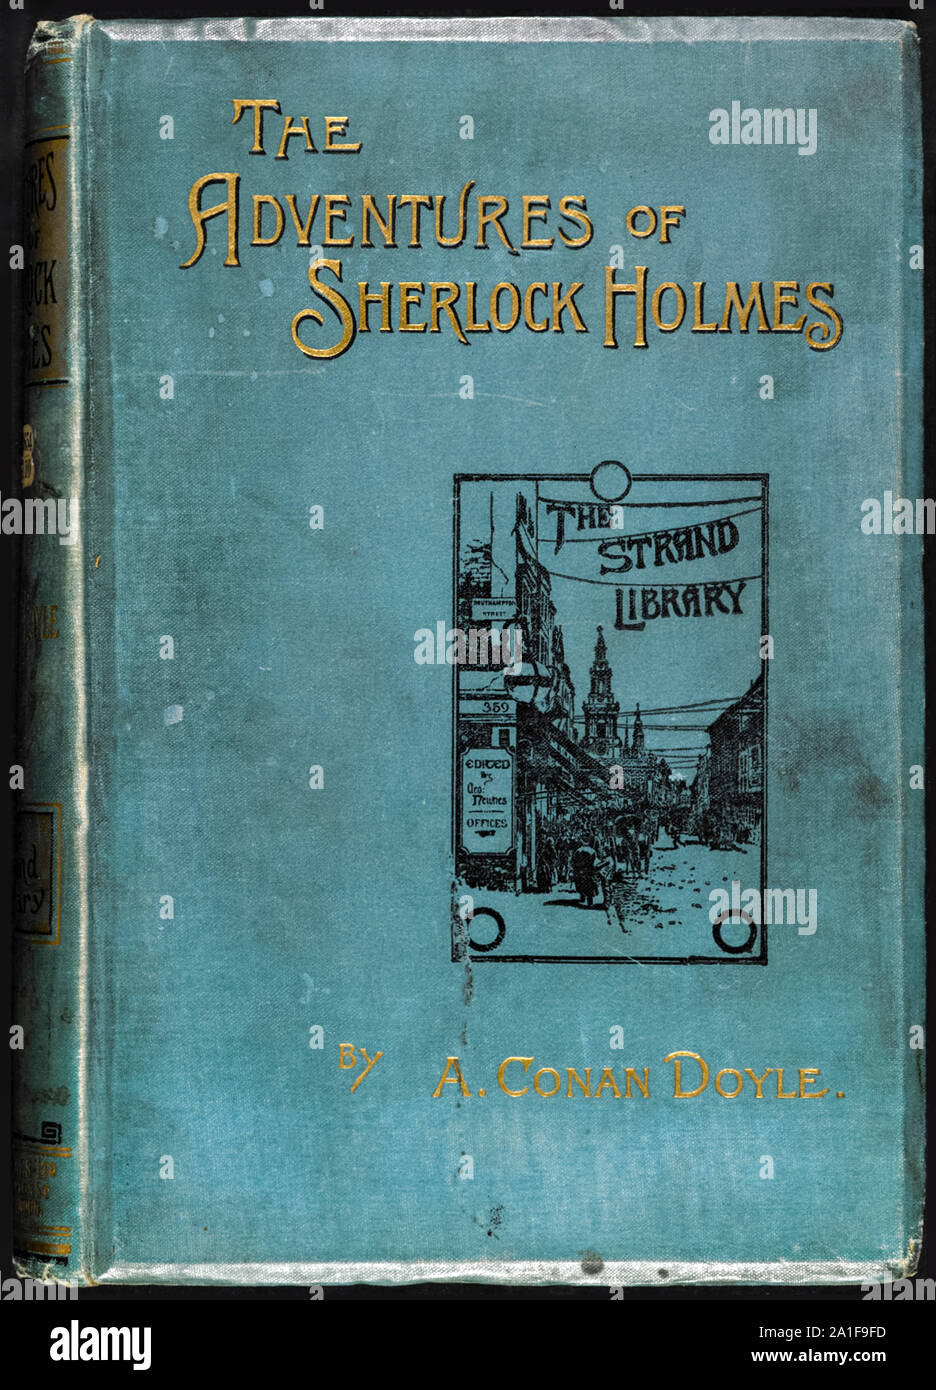 The Adventures of Sherlock Holmes by Sir Arthur Conan Doyle (1859-1930)   Front Cover of second edition published in 1893. It contains the earliest short stories featuring the consulting detective Sherlock Holmes, which had been published in twelve monthly issues of The Strand Magazine from July 1891 to June 1892. Stock Photo